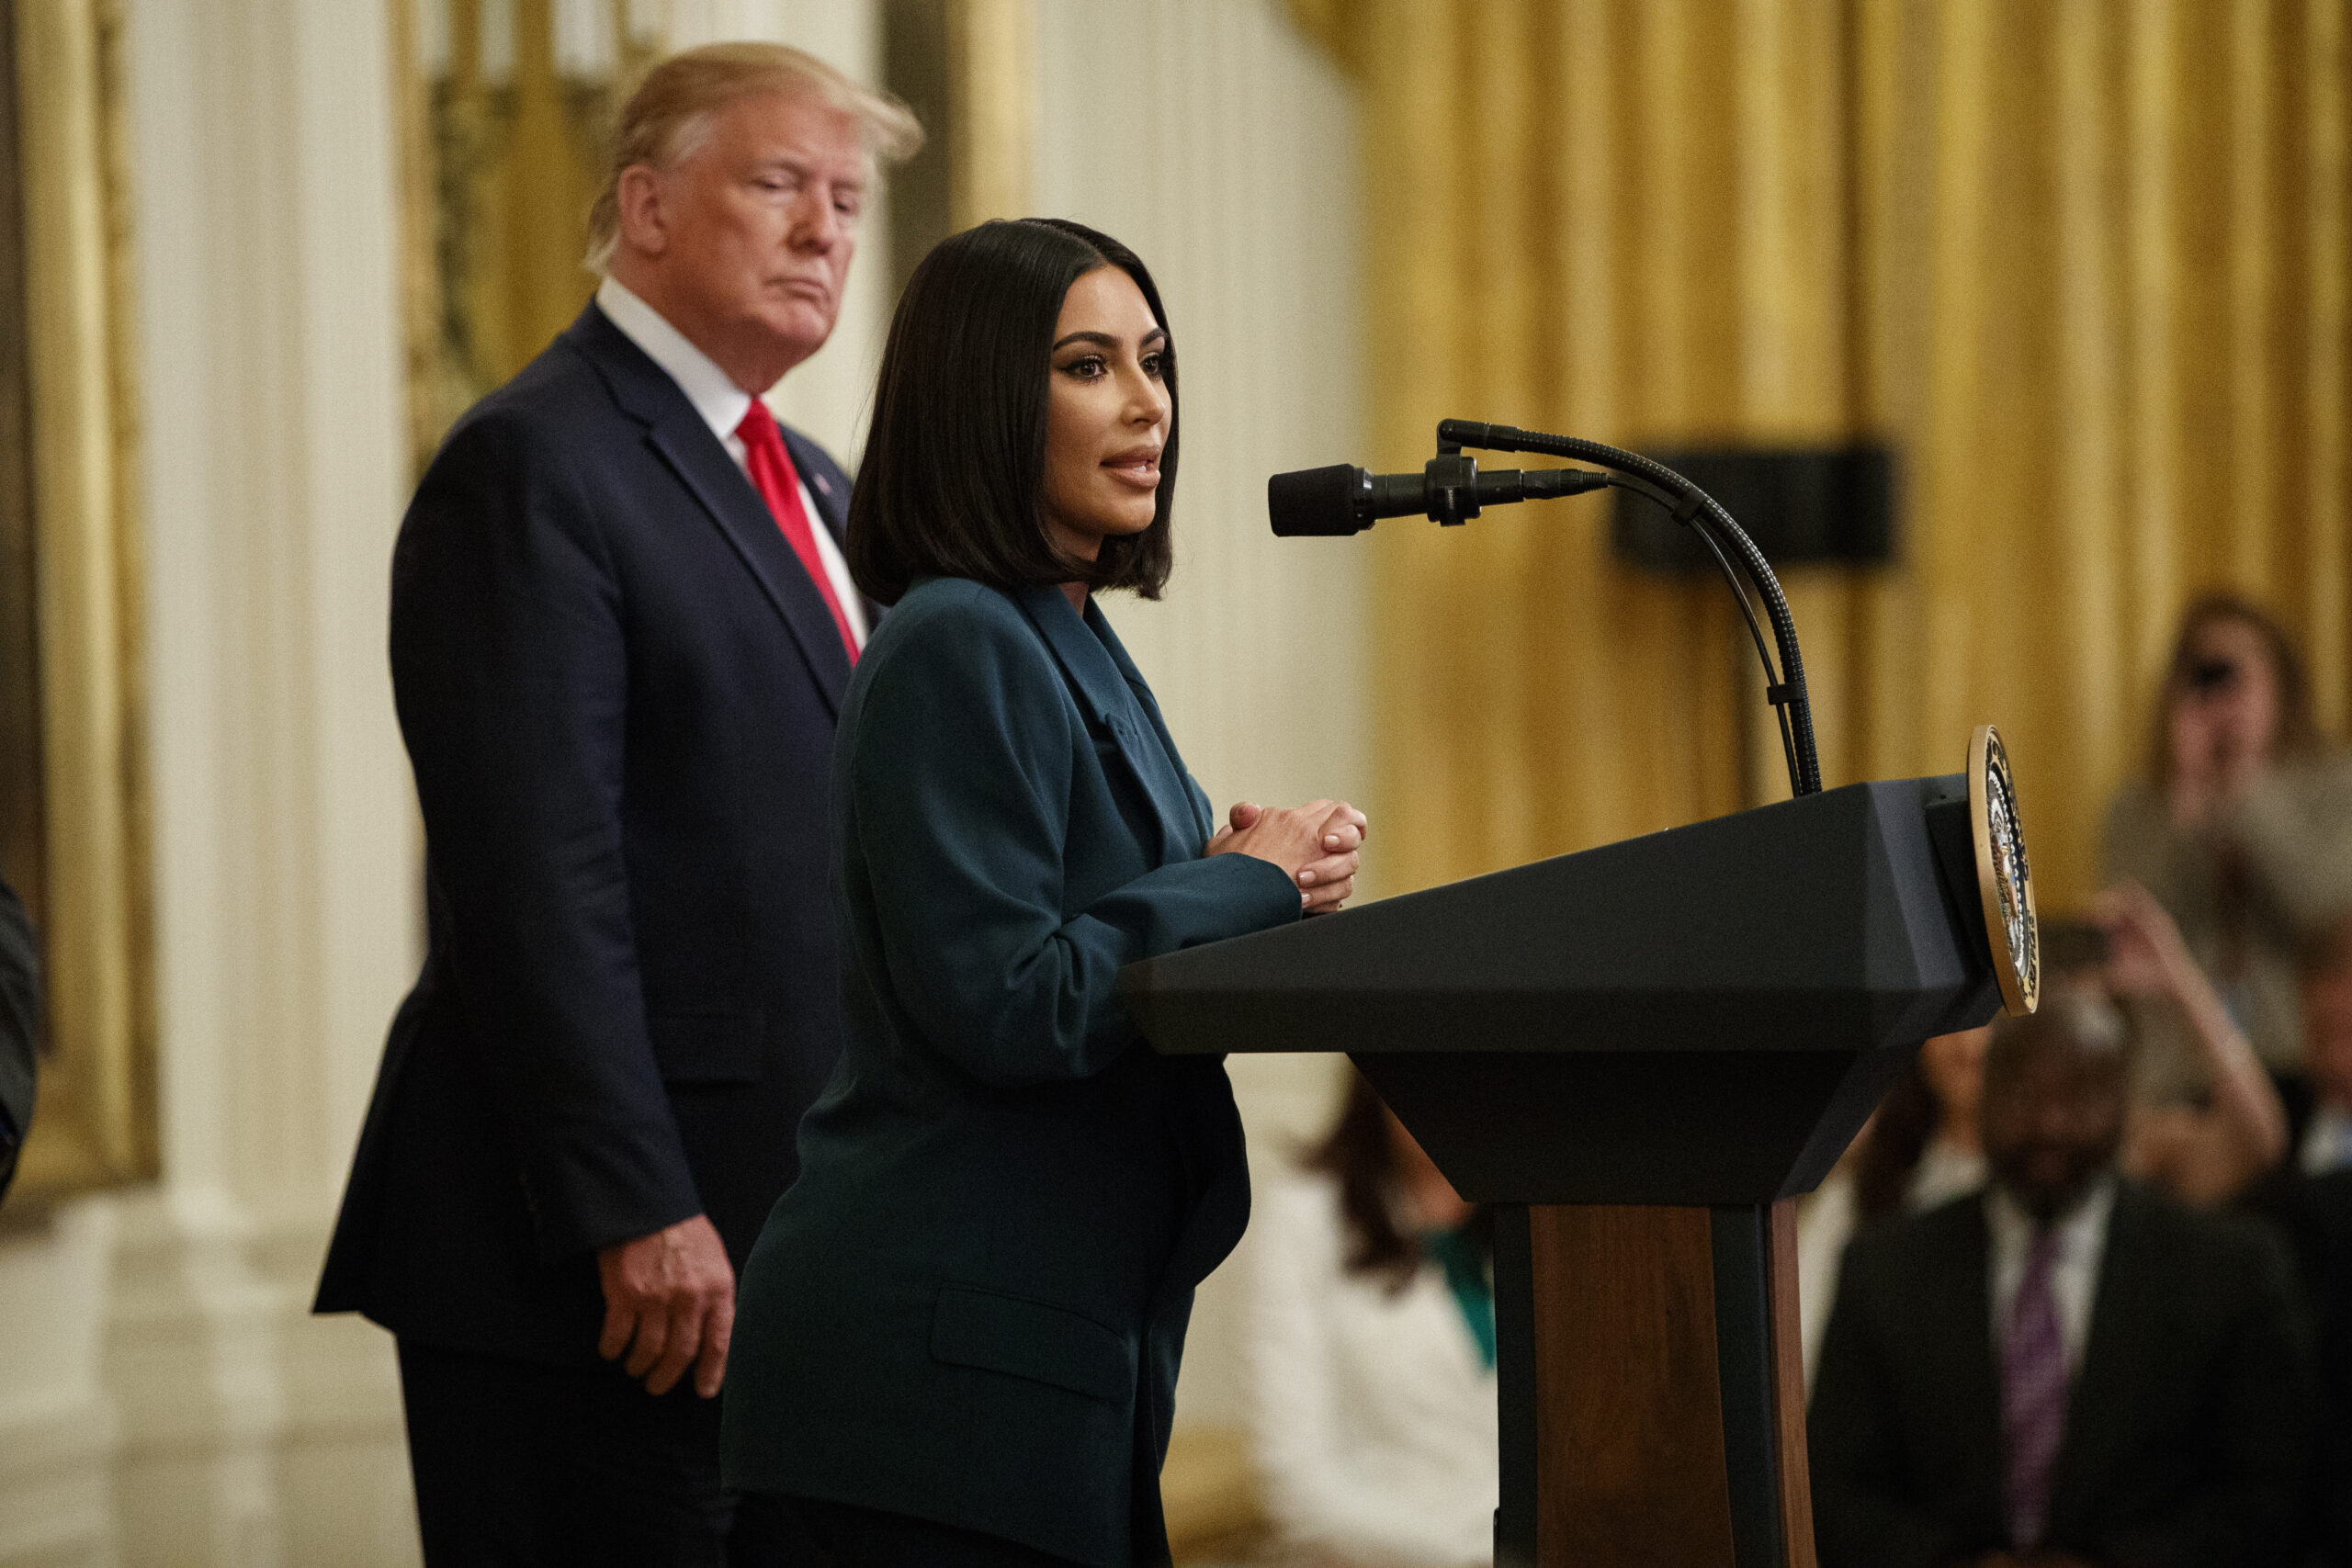 Trump Loses It on 'Most Overrated Celebrity' Kim Kardashian